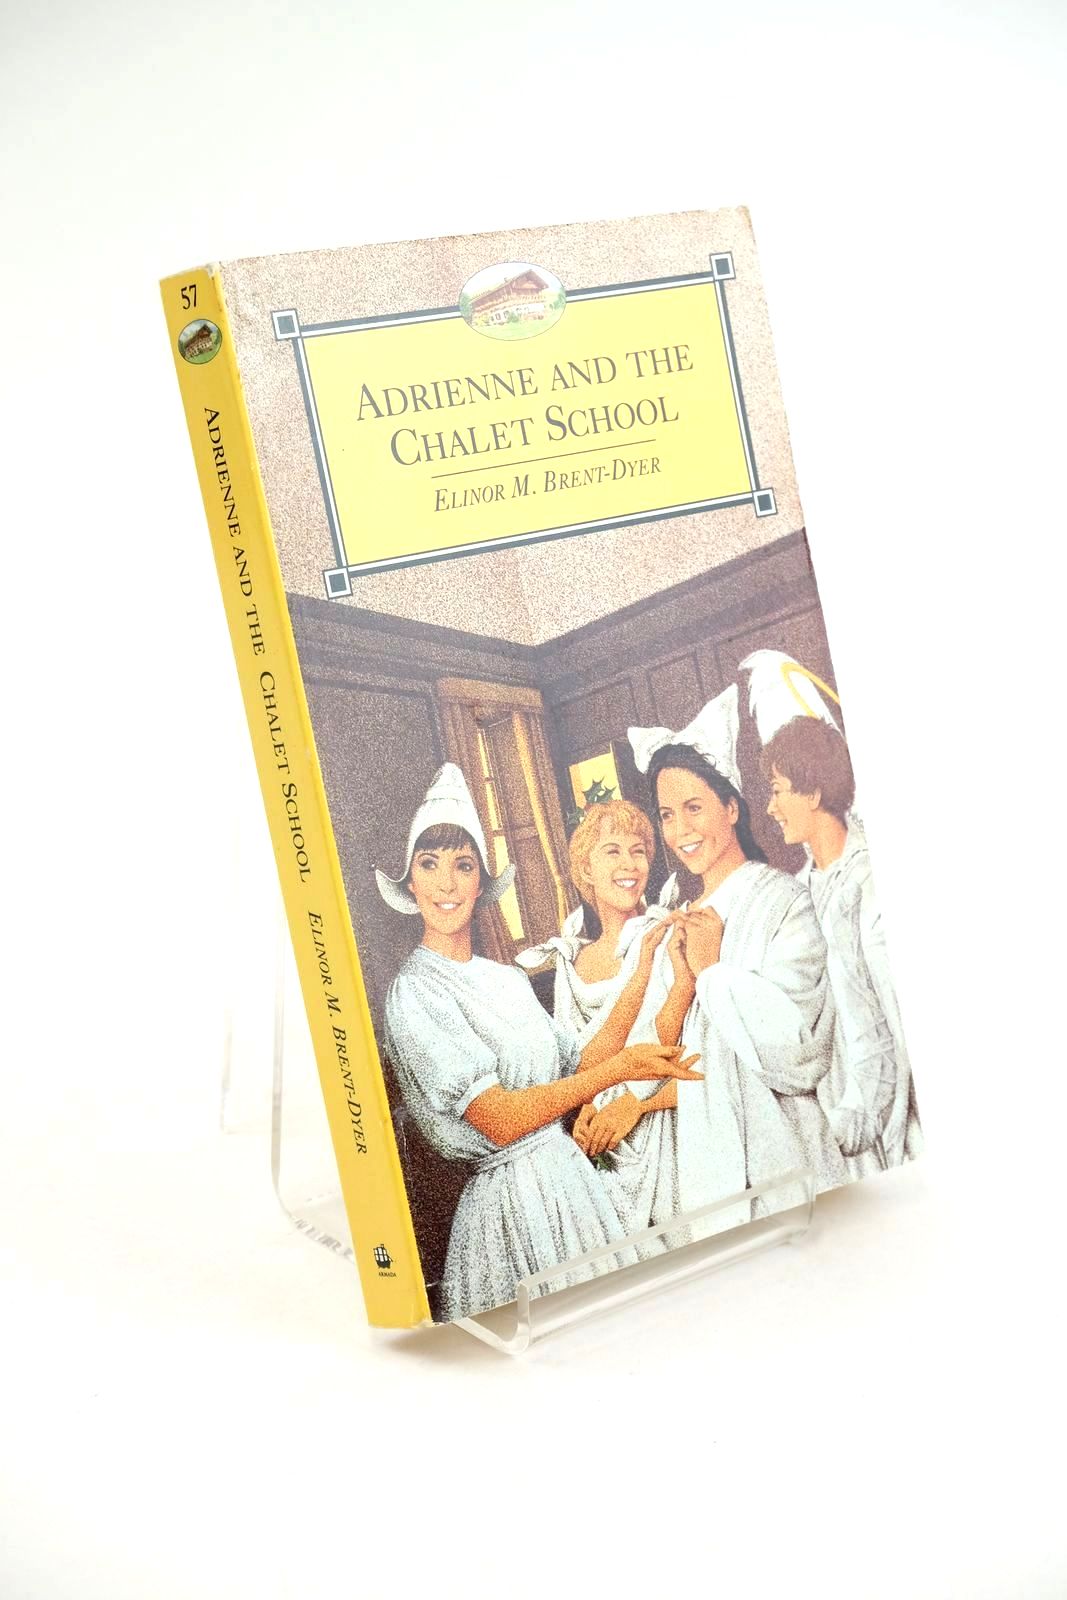 Photo of ADRIENNE AND THE CHALET SCHOOL written by Brent-Dyer, Elinor M. published by Armada (STOCK CODE: 1323995)  for sale by Stella & Rose's Books